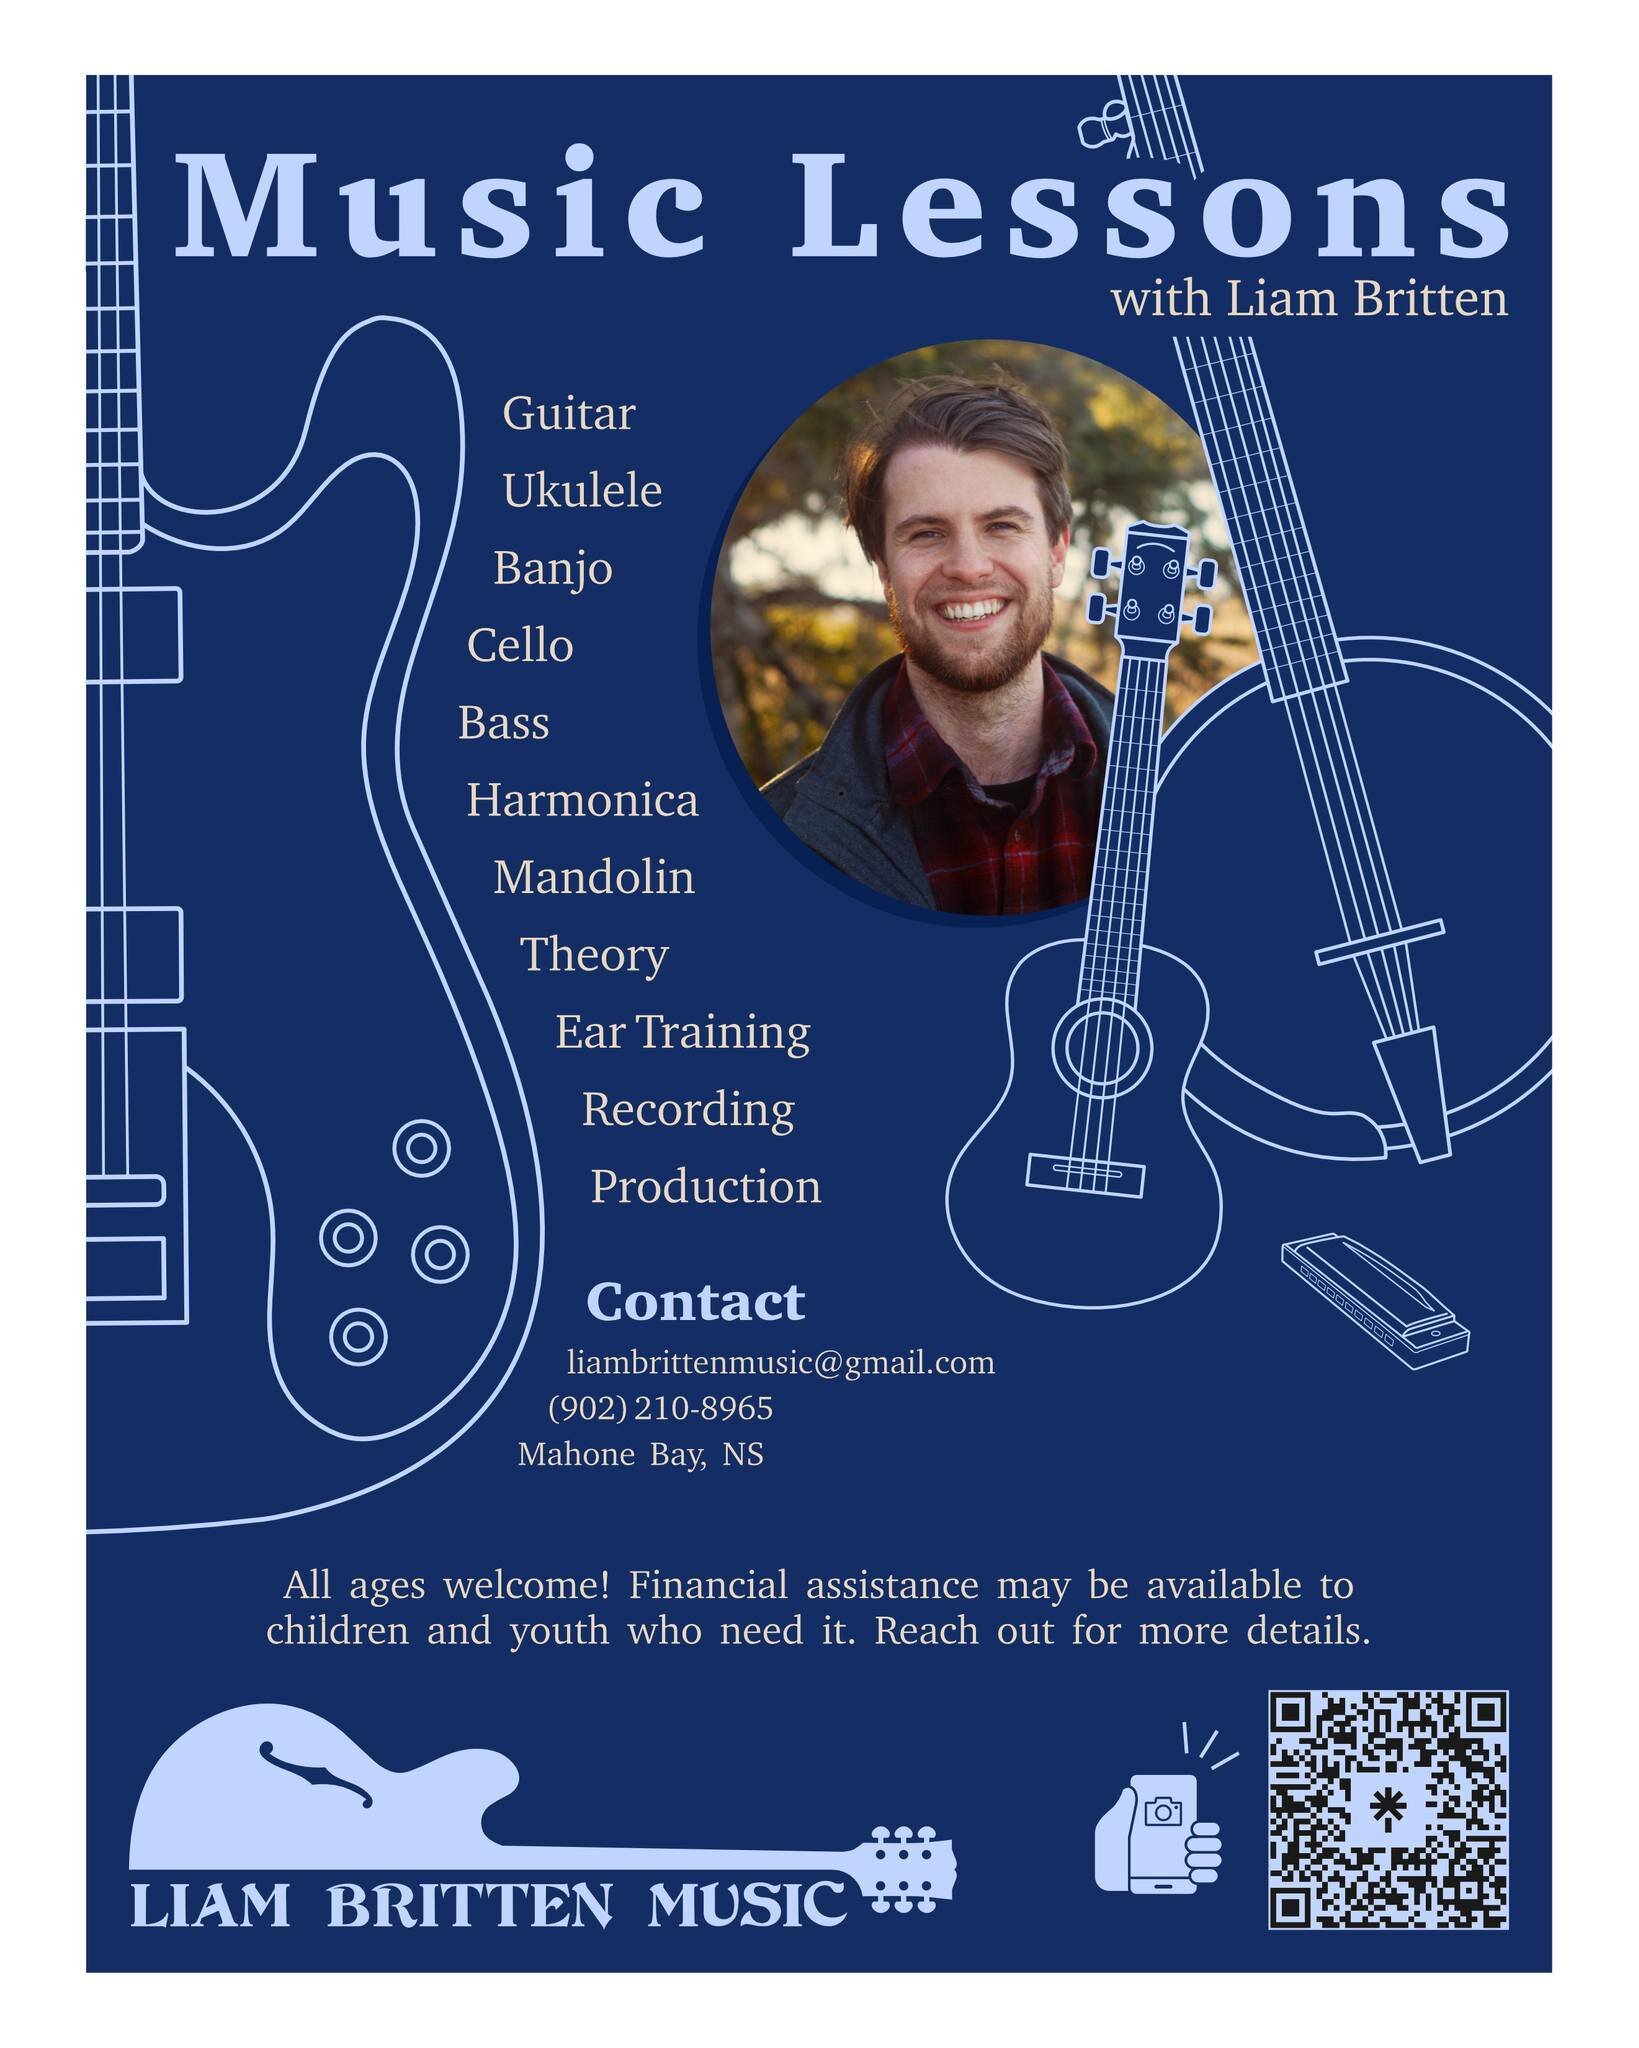 I have opened up my home studio for lessons this year. You can book lessons through my new website, https://www.liambrittenmusic.ca/ (link in bio) or contact me at liambrittenmusic@gmail.com or 902-210-8965. 

Check out this awesome poster by my amaz